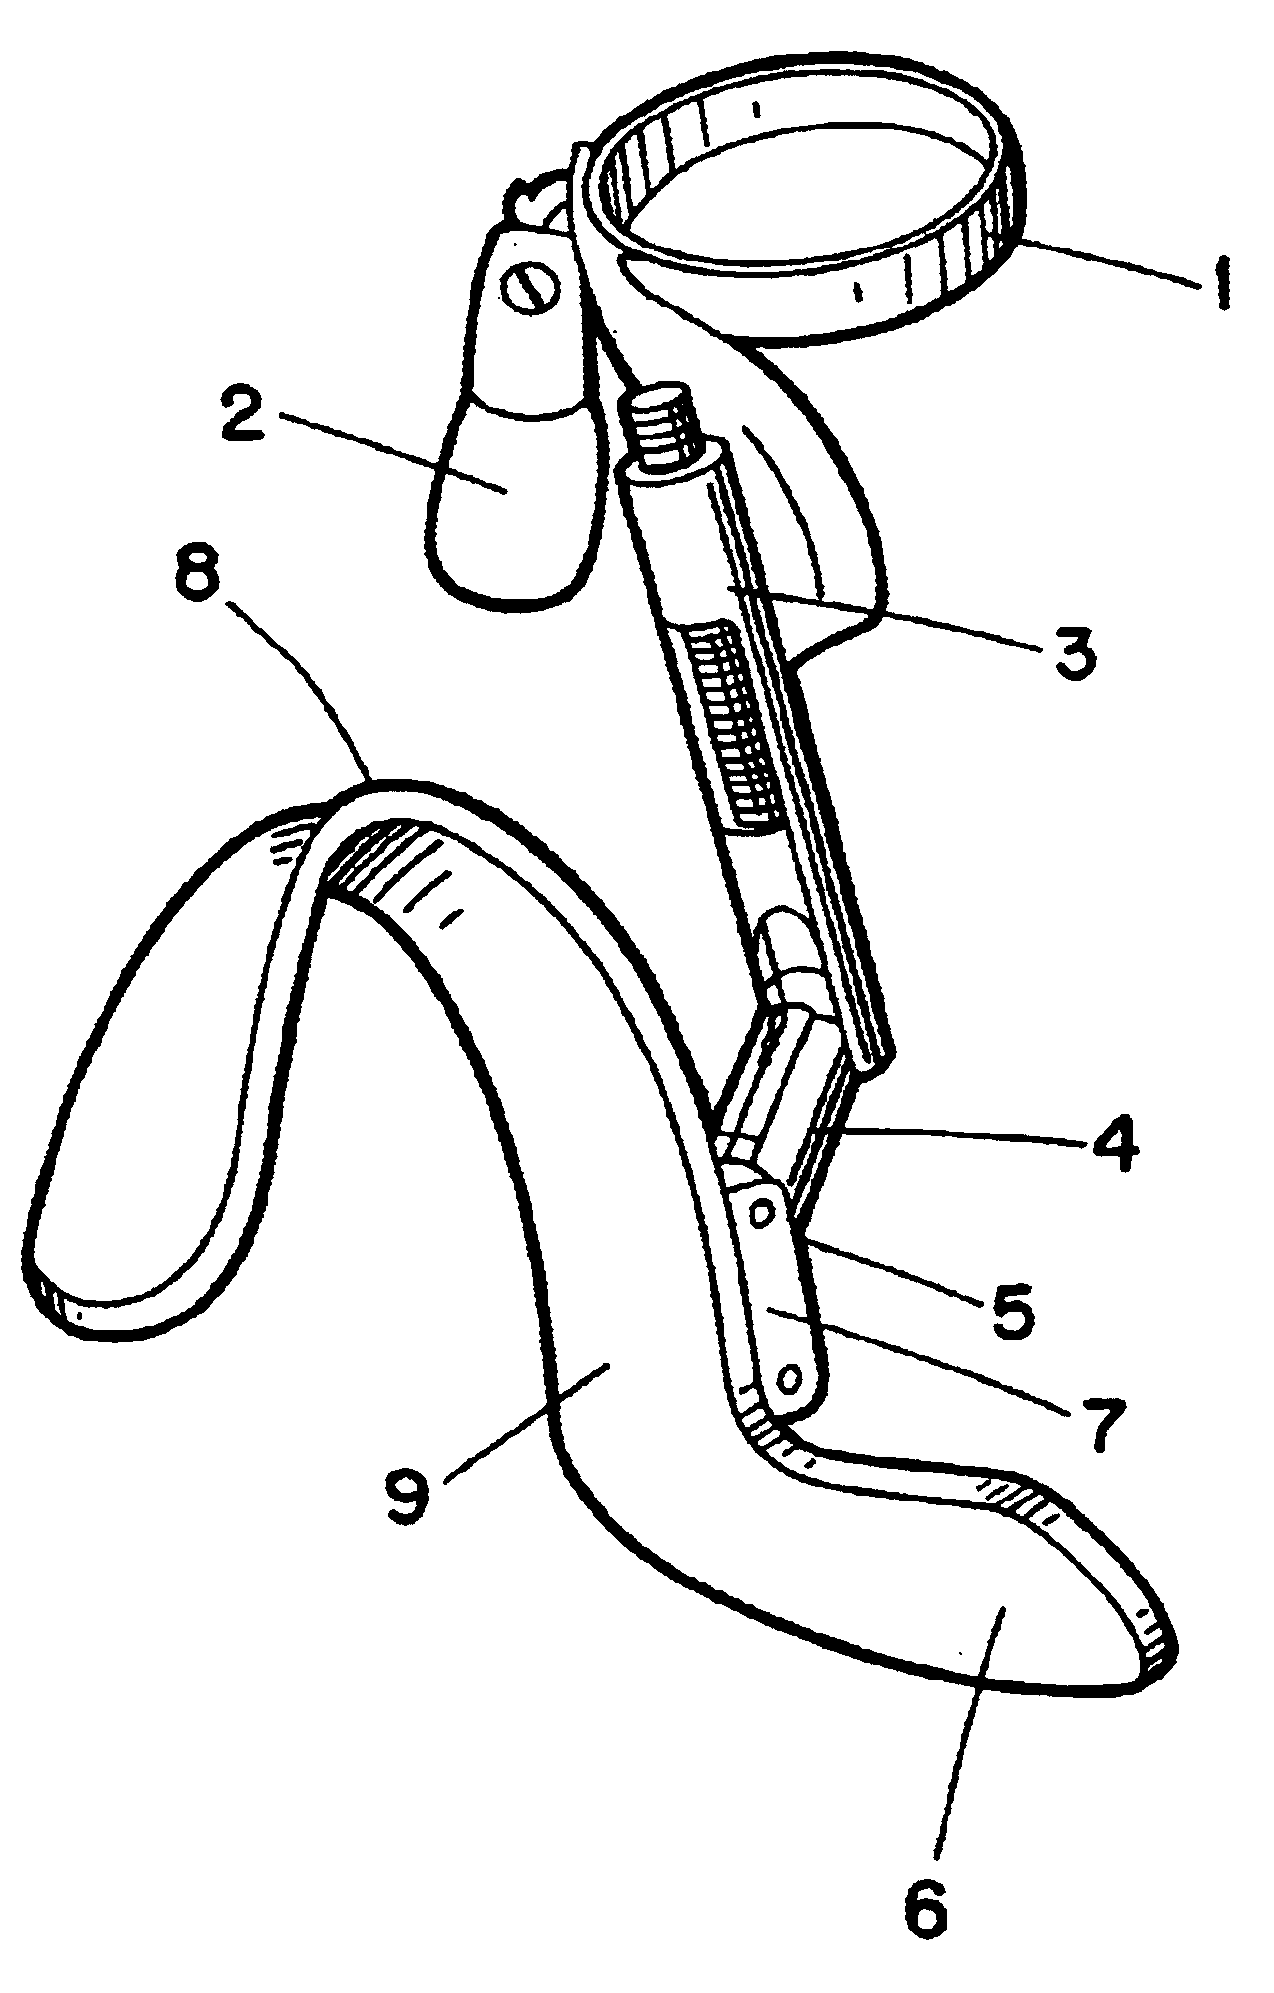 Supporting device for music instrument